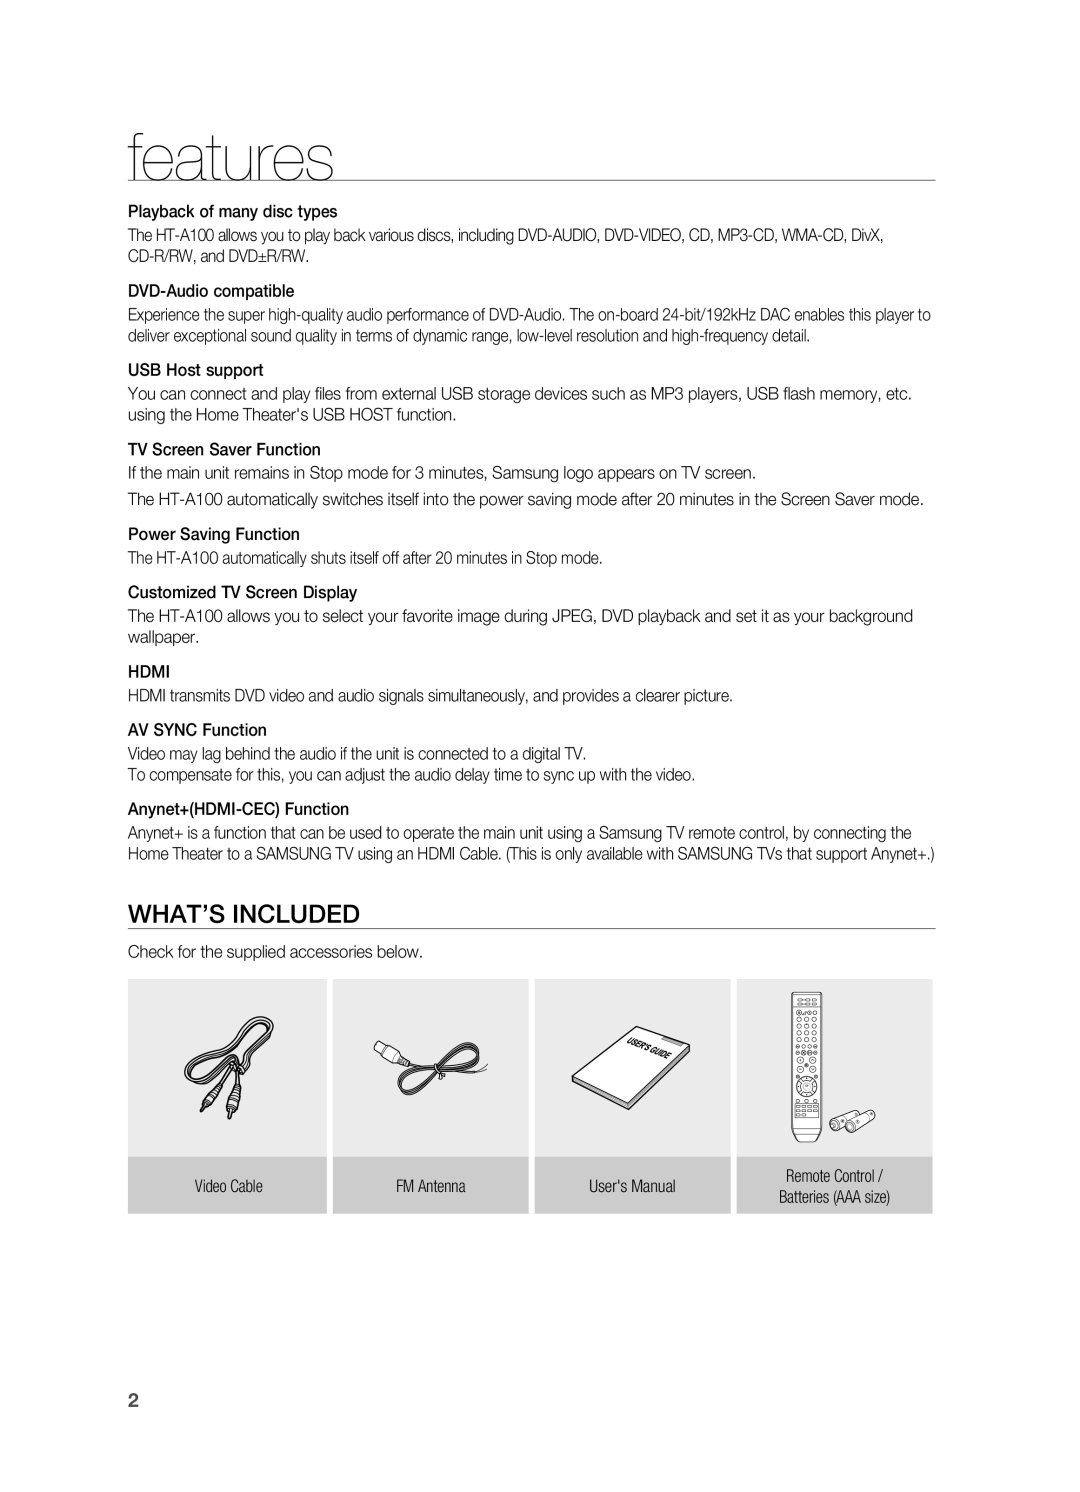 Samsung HT-A100 user manual features, What’s included 